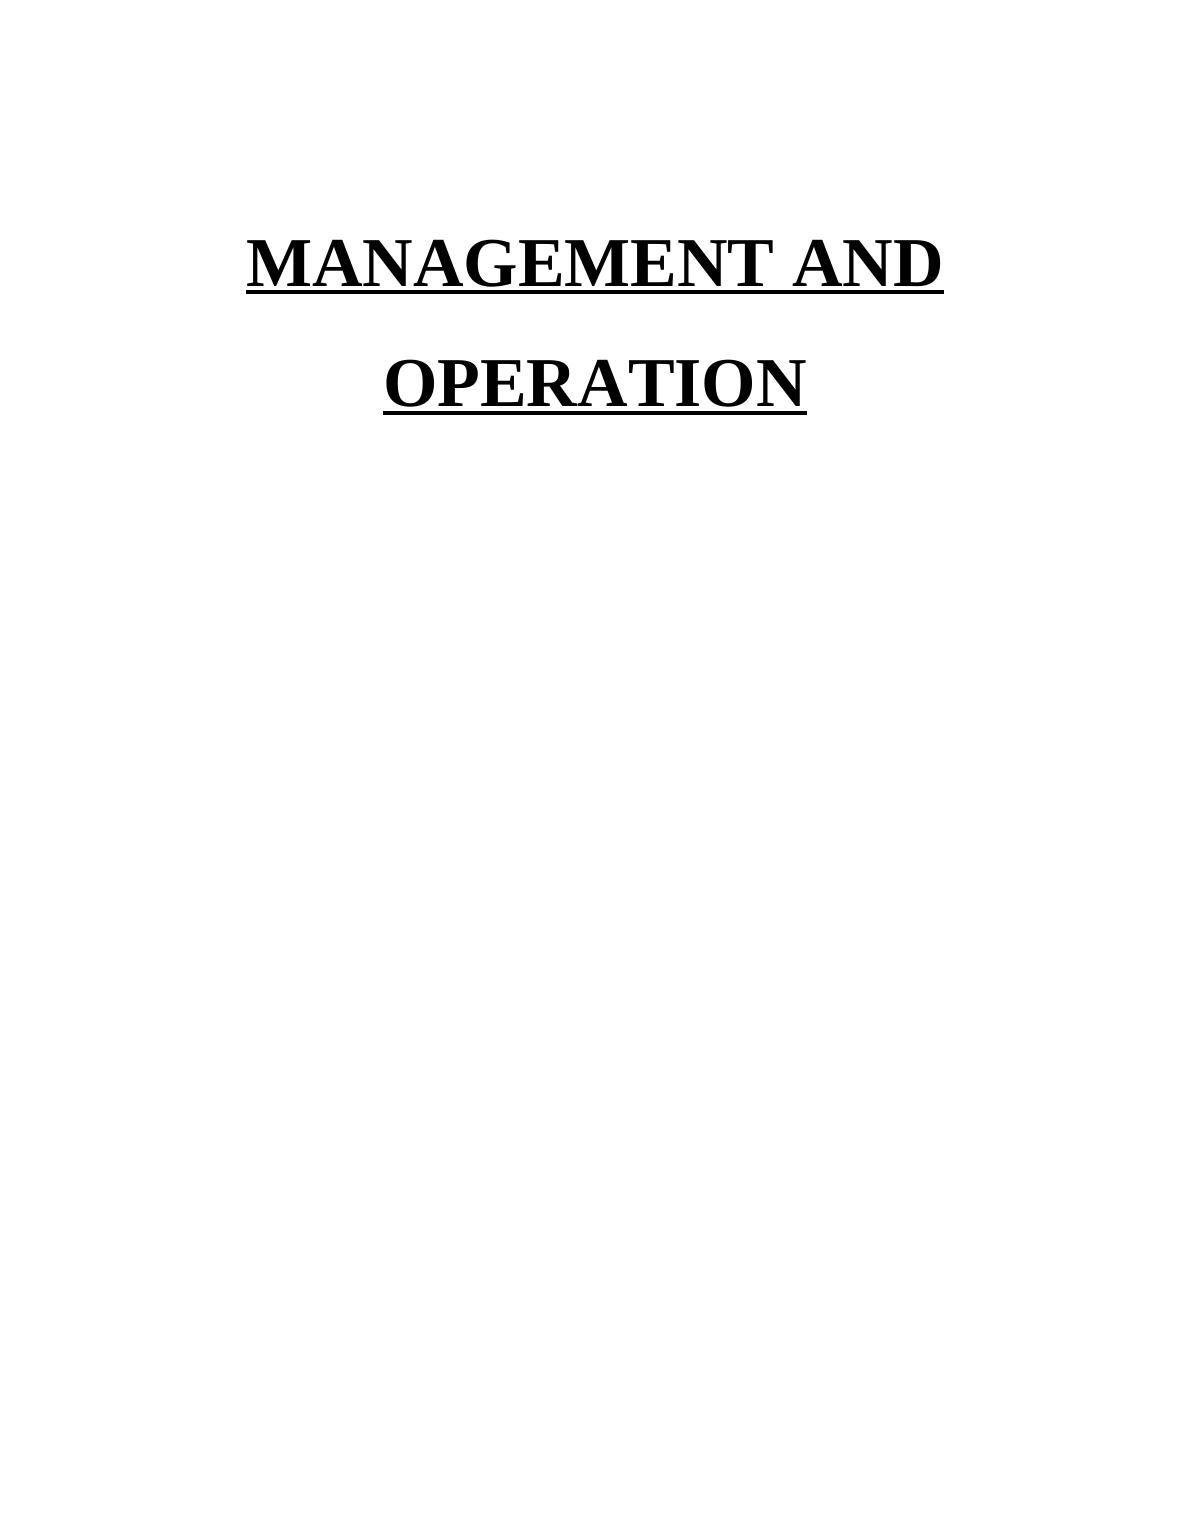 Unit 4 - Management and Operations_1